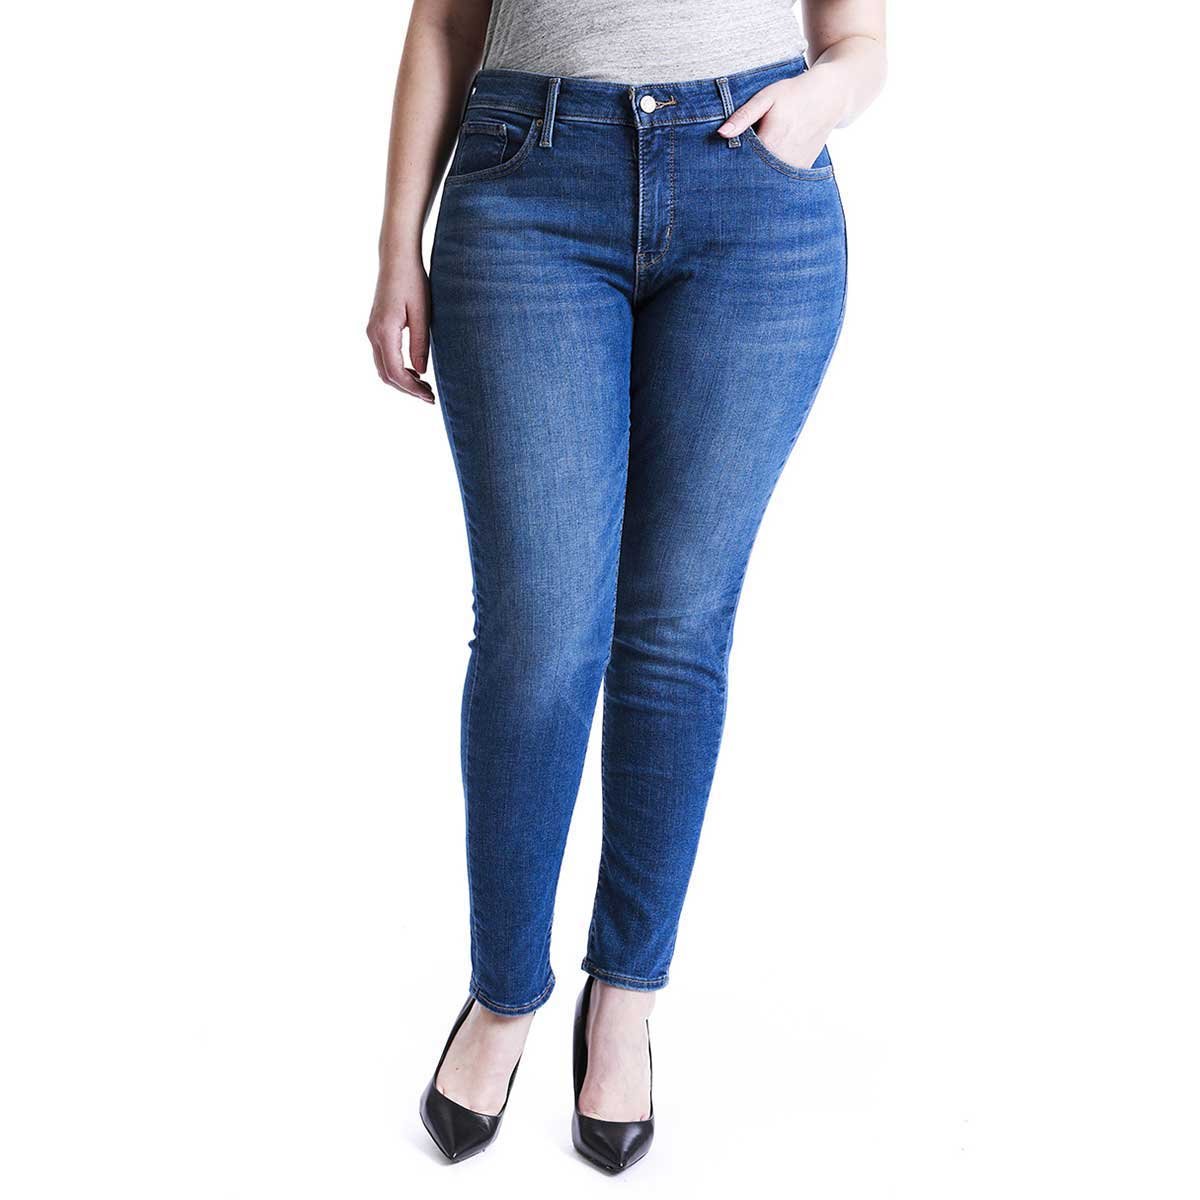 Jeans 310 Shaping Super Skinny Plus Levis para Mujer